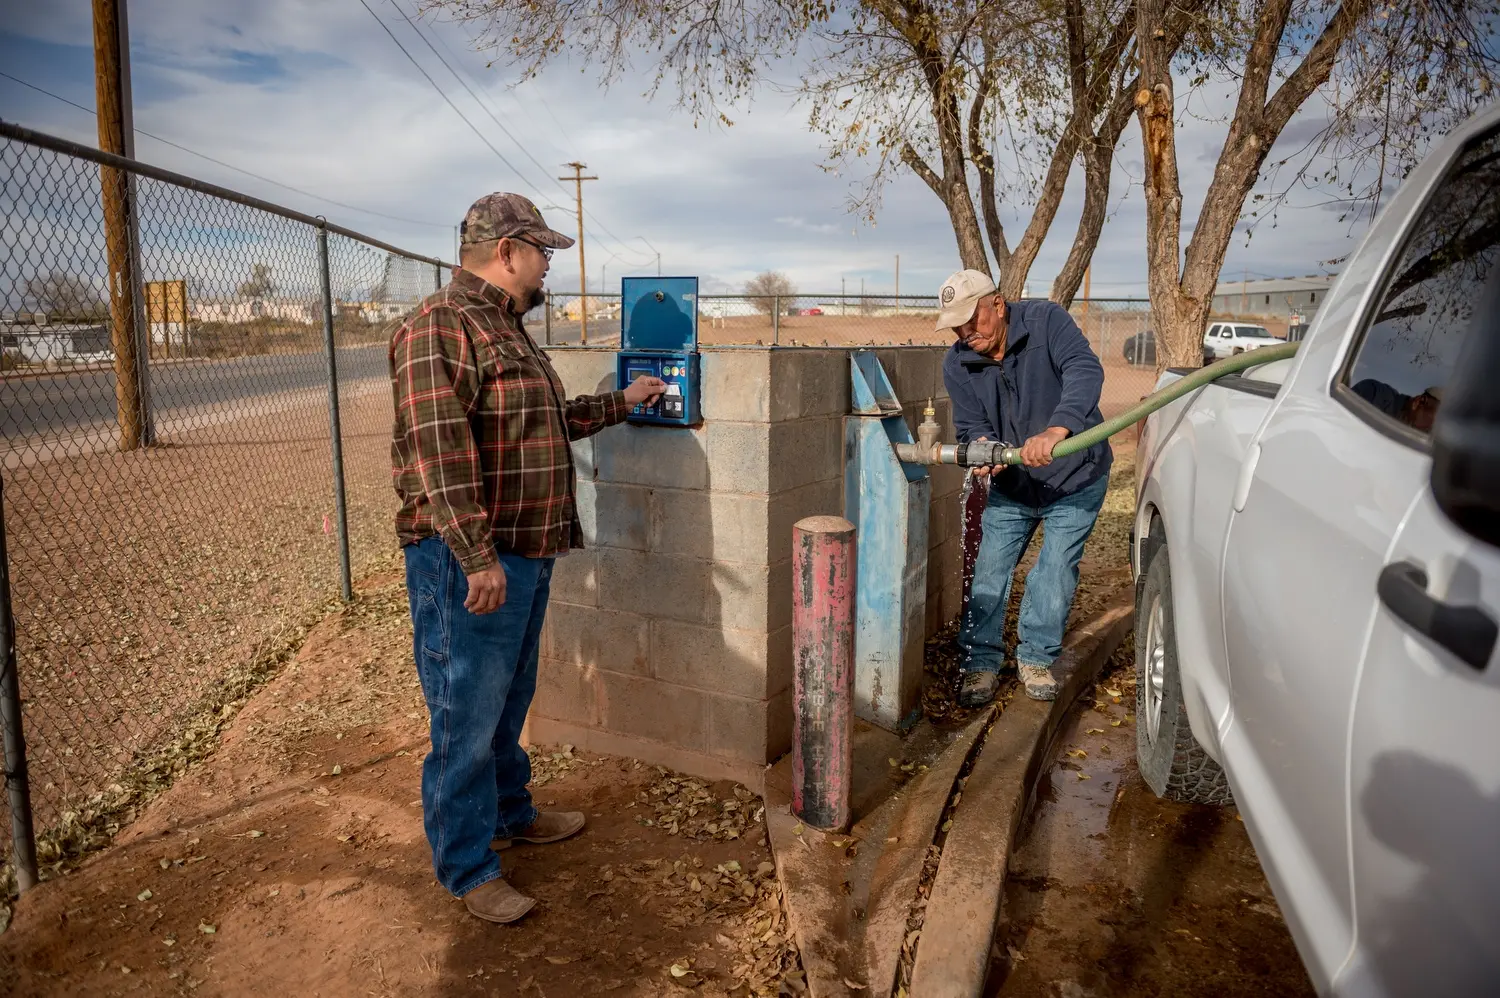 Leroy Canyon and Brandon Canyon are pictured getting getting water from tanks in Tuba City. Image by Mary F. Calvert. United States, 2020.